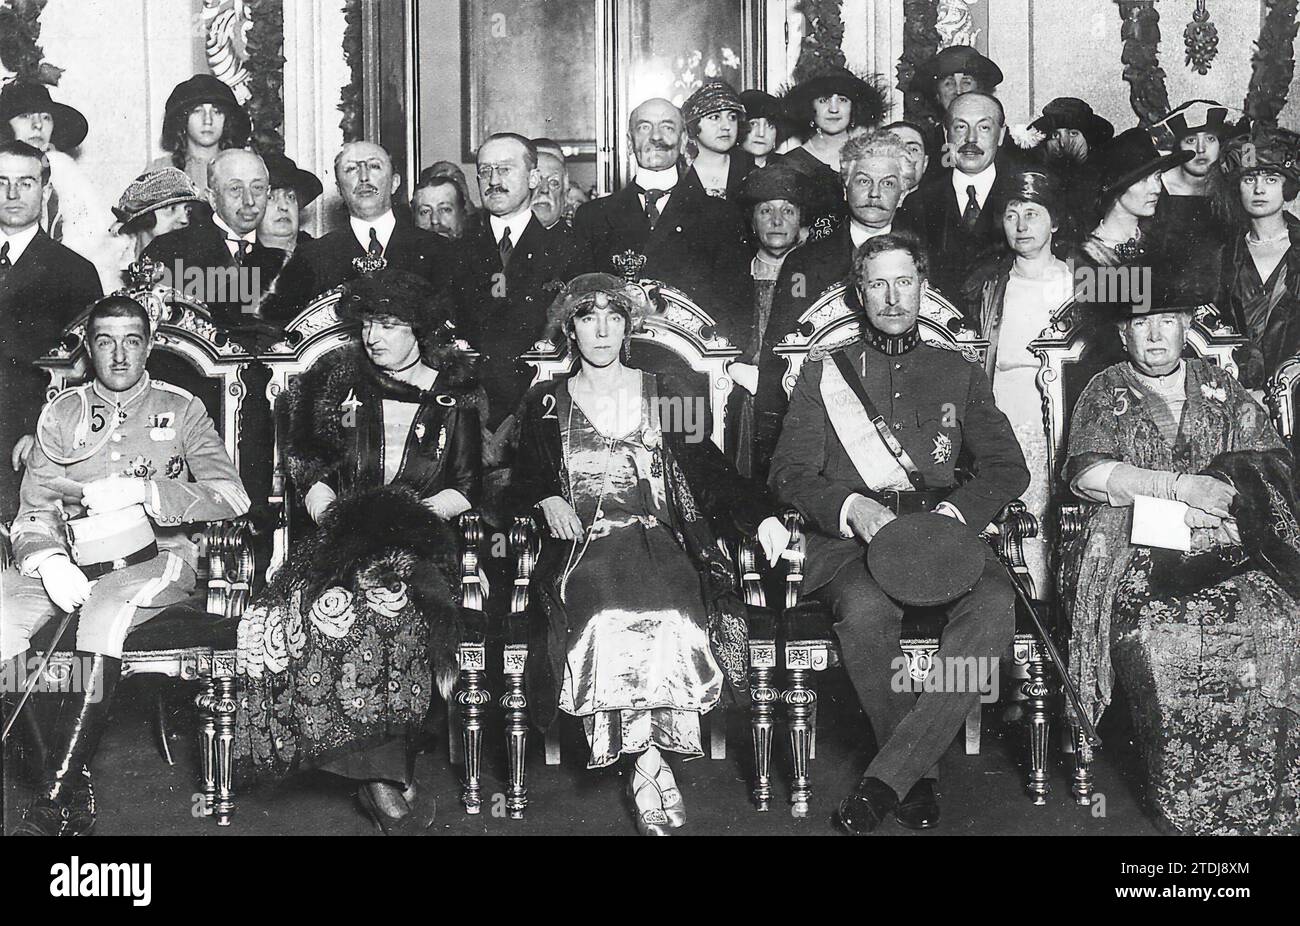 02/02/1921. Madrid. In the city Hall. H.H. Mm. the Kings of Belgium (1 and 2), with Ss. Ah. the Infantas Doña Isabel (3), Doña Luisa (4) and the Infante D. Alfonso (5), at the reception held yesterday in honor of the Belgian Sovereigns. Credit: Album / Archivo ABC / Julio Duque Stock Photo